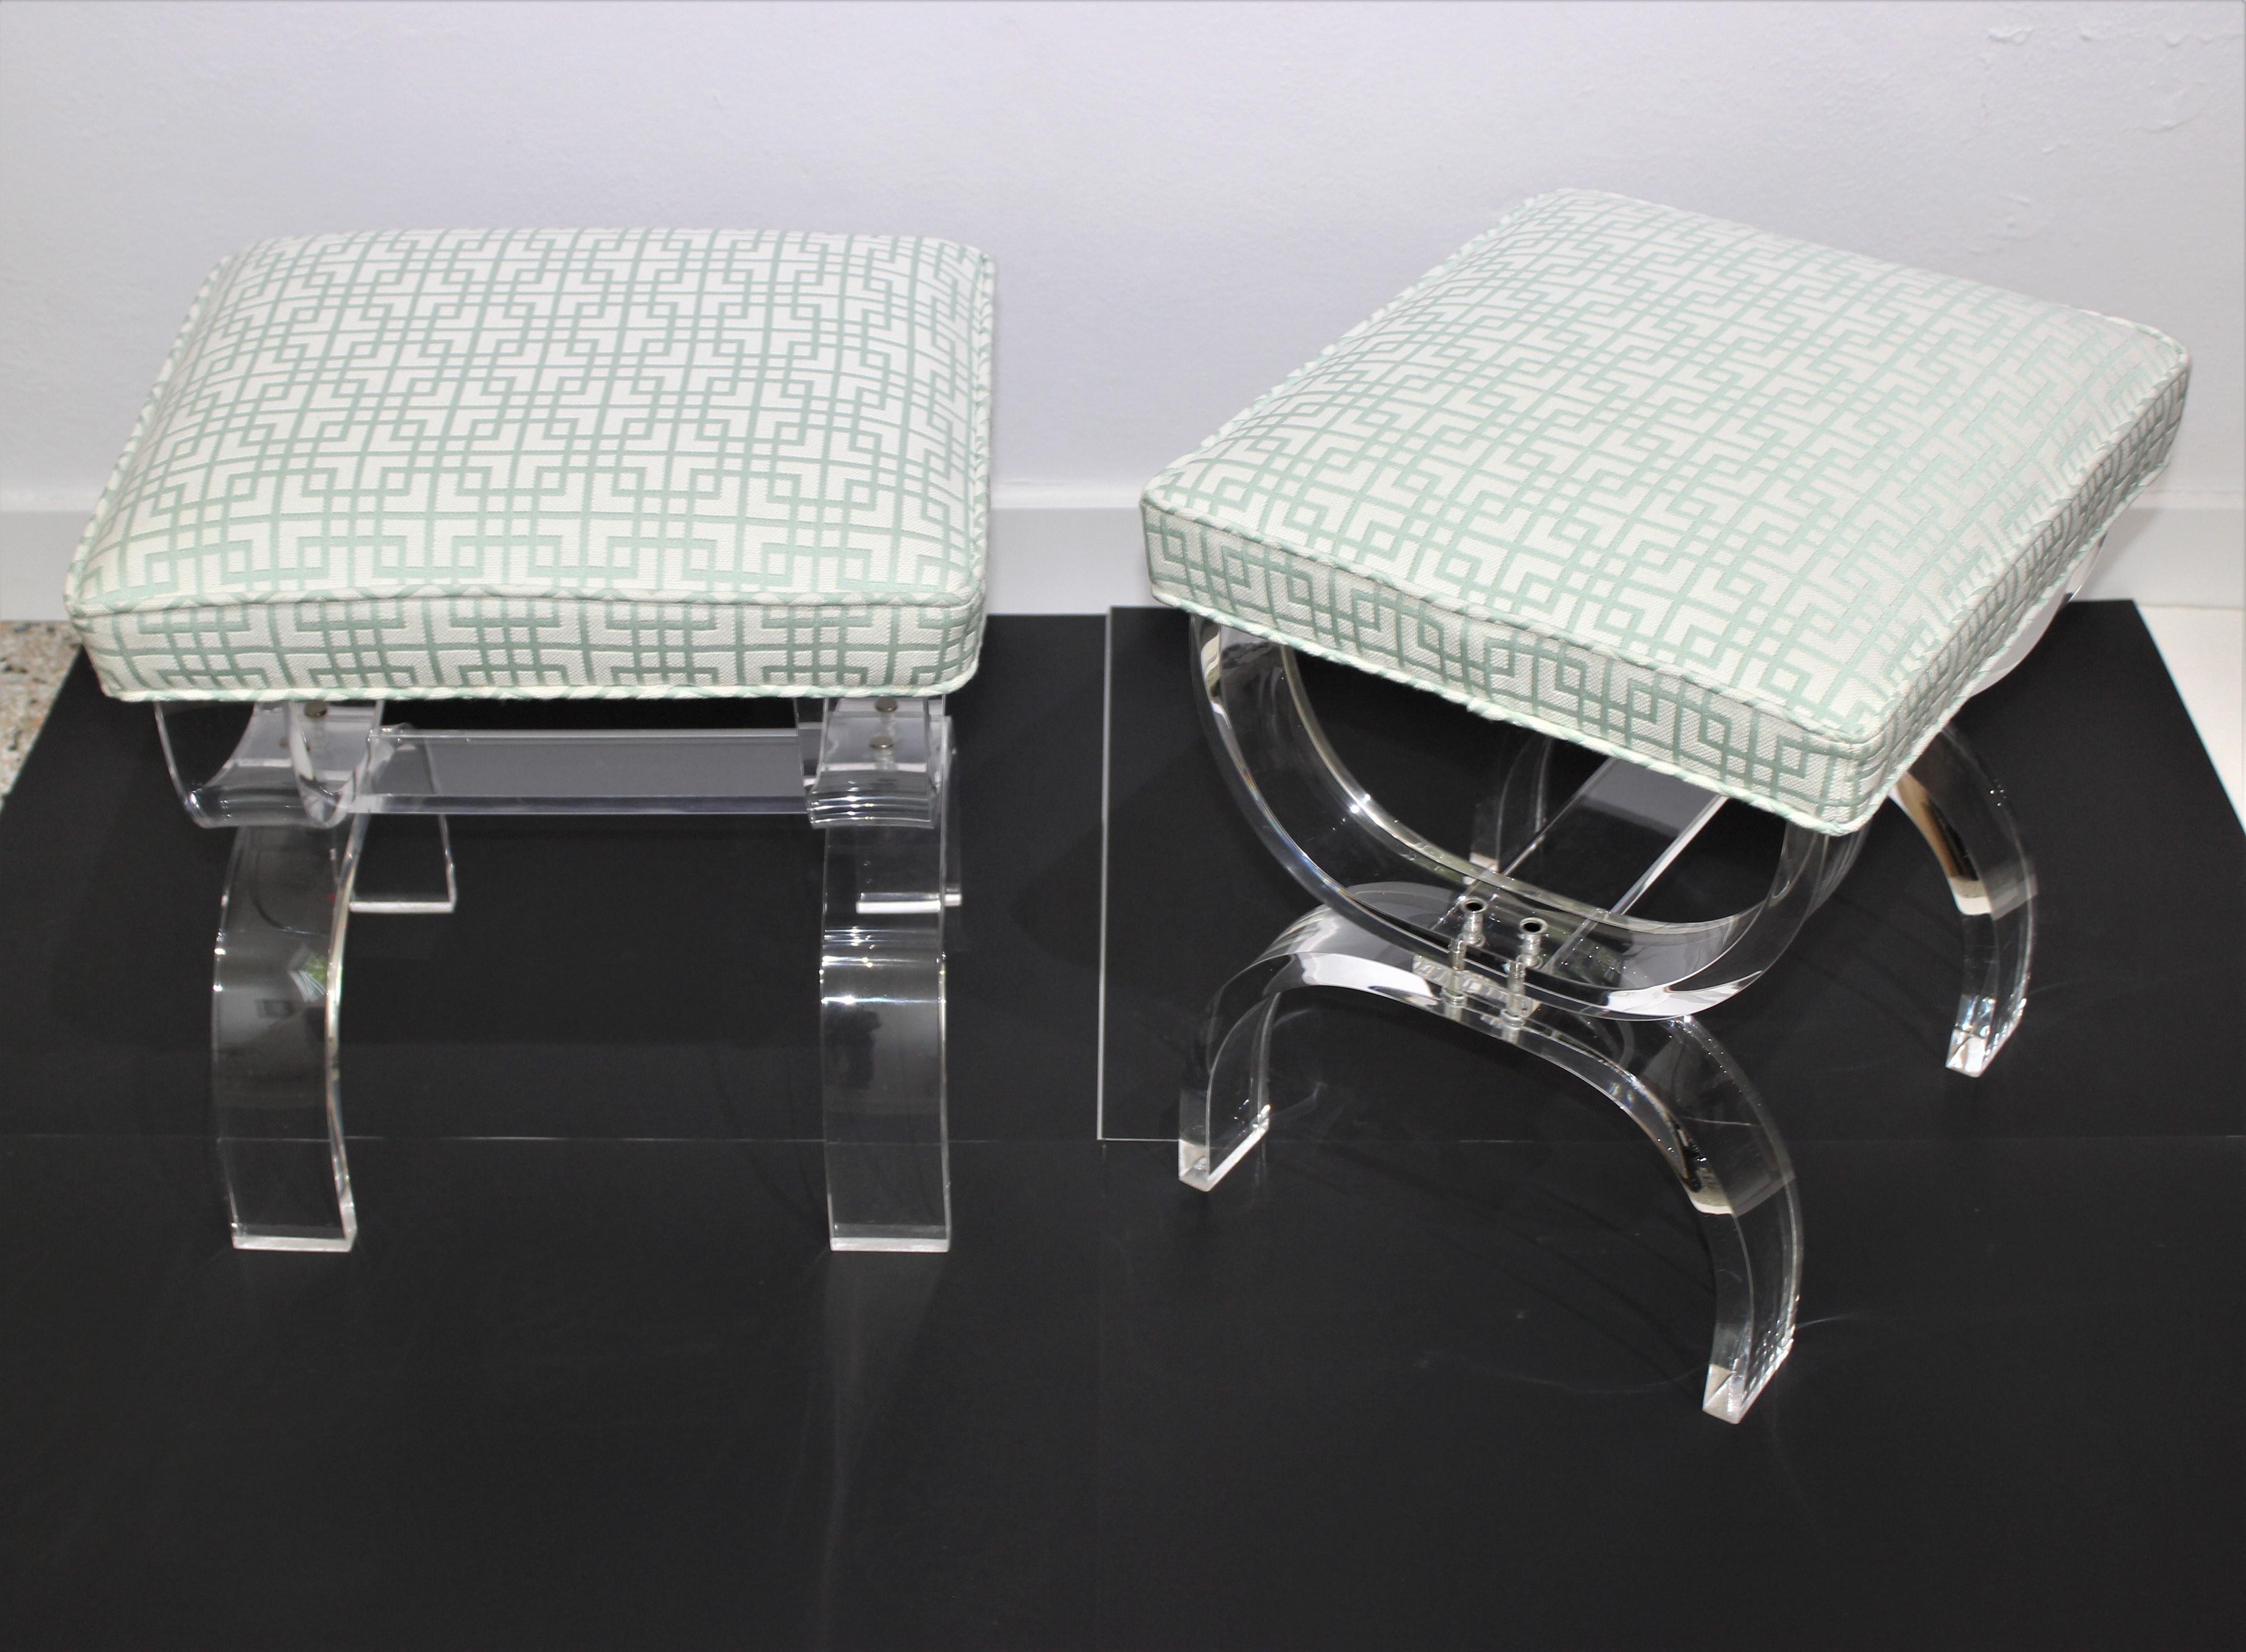 Hollis Jones style Lucite U-benches stools 1940s, newly upholstered, a pair from a Palm Beach estate.